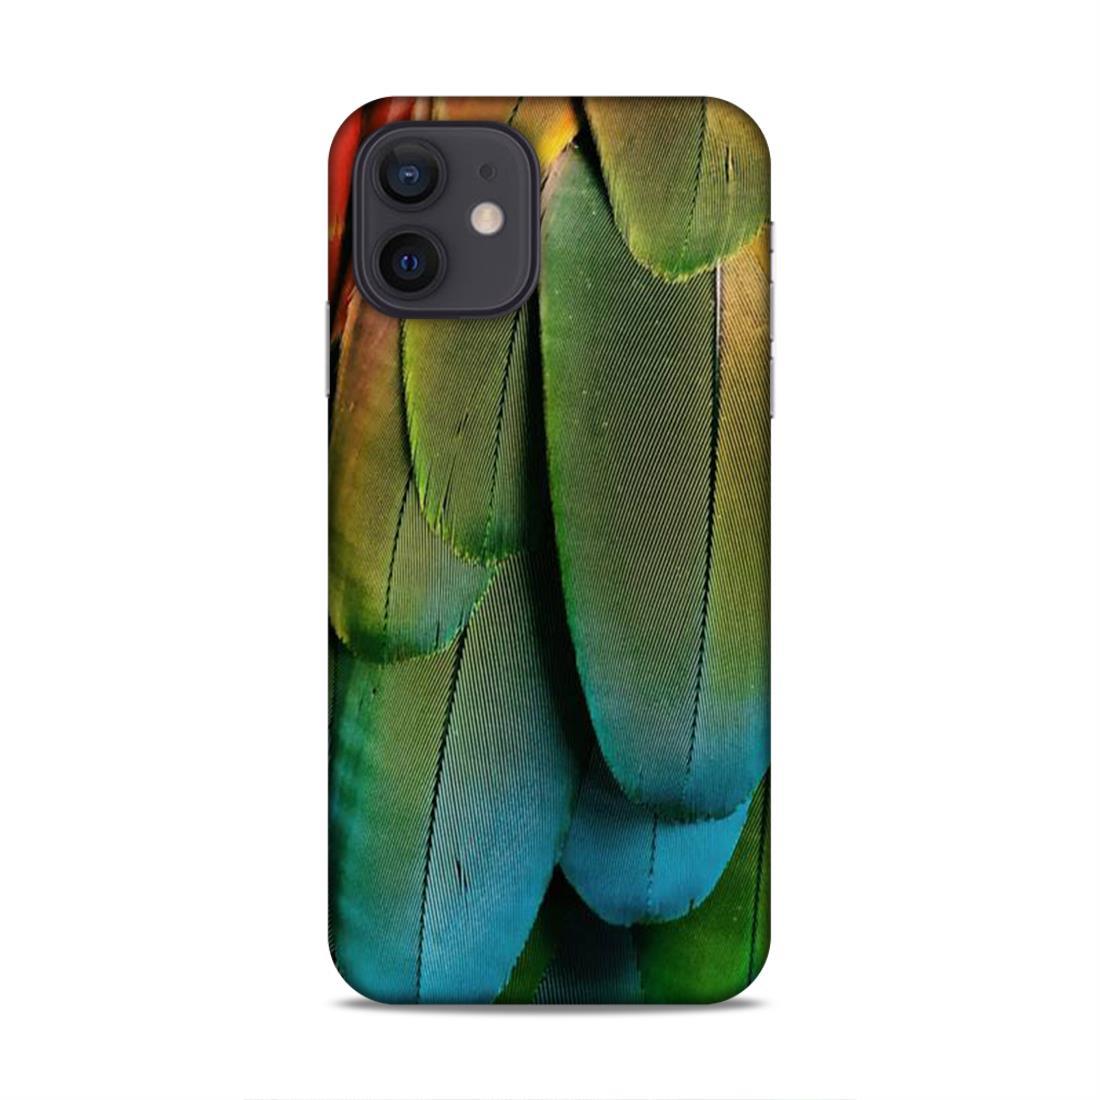 Green Leaves iPhone 12 Mobile Cover Case